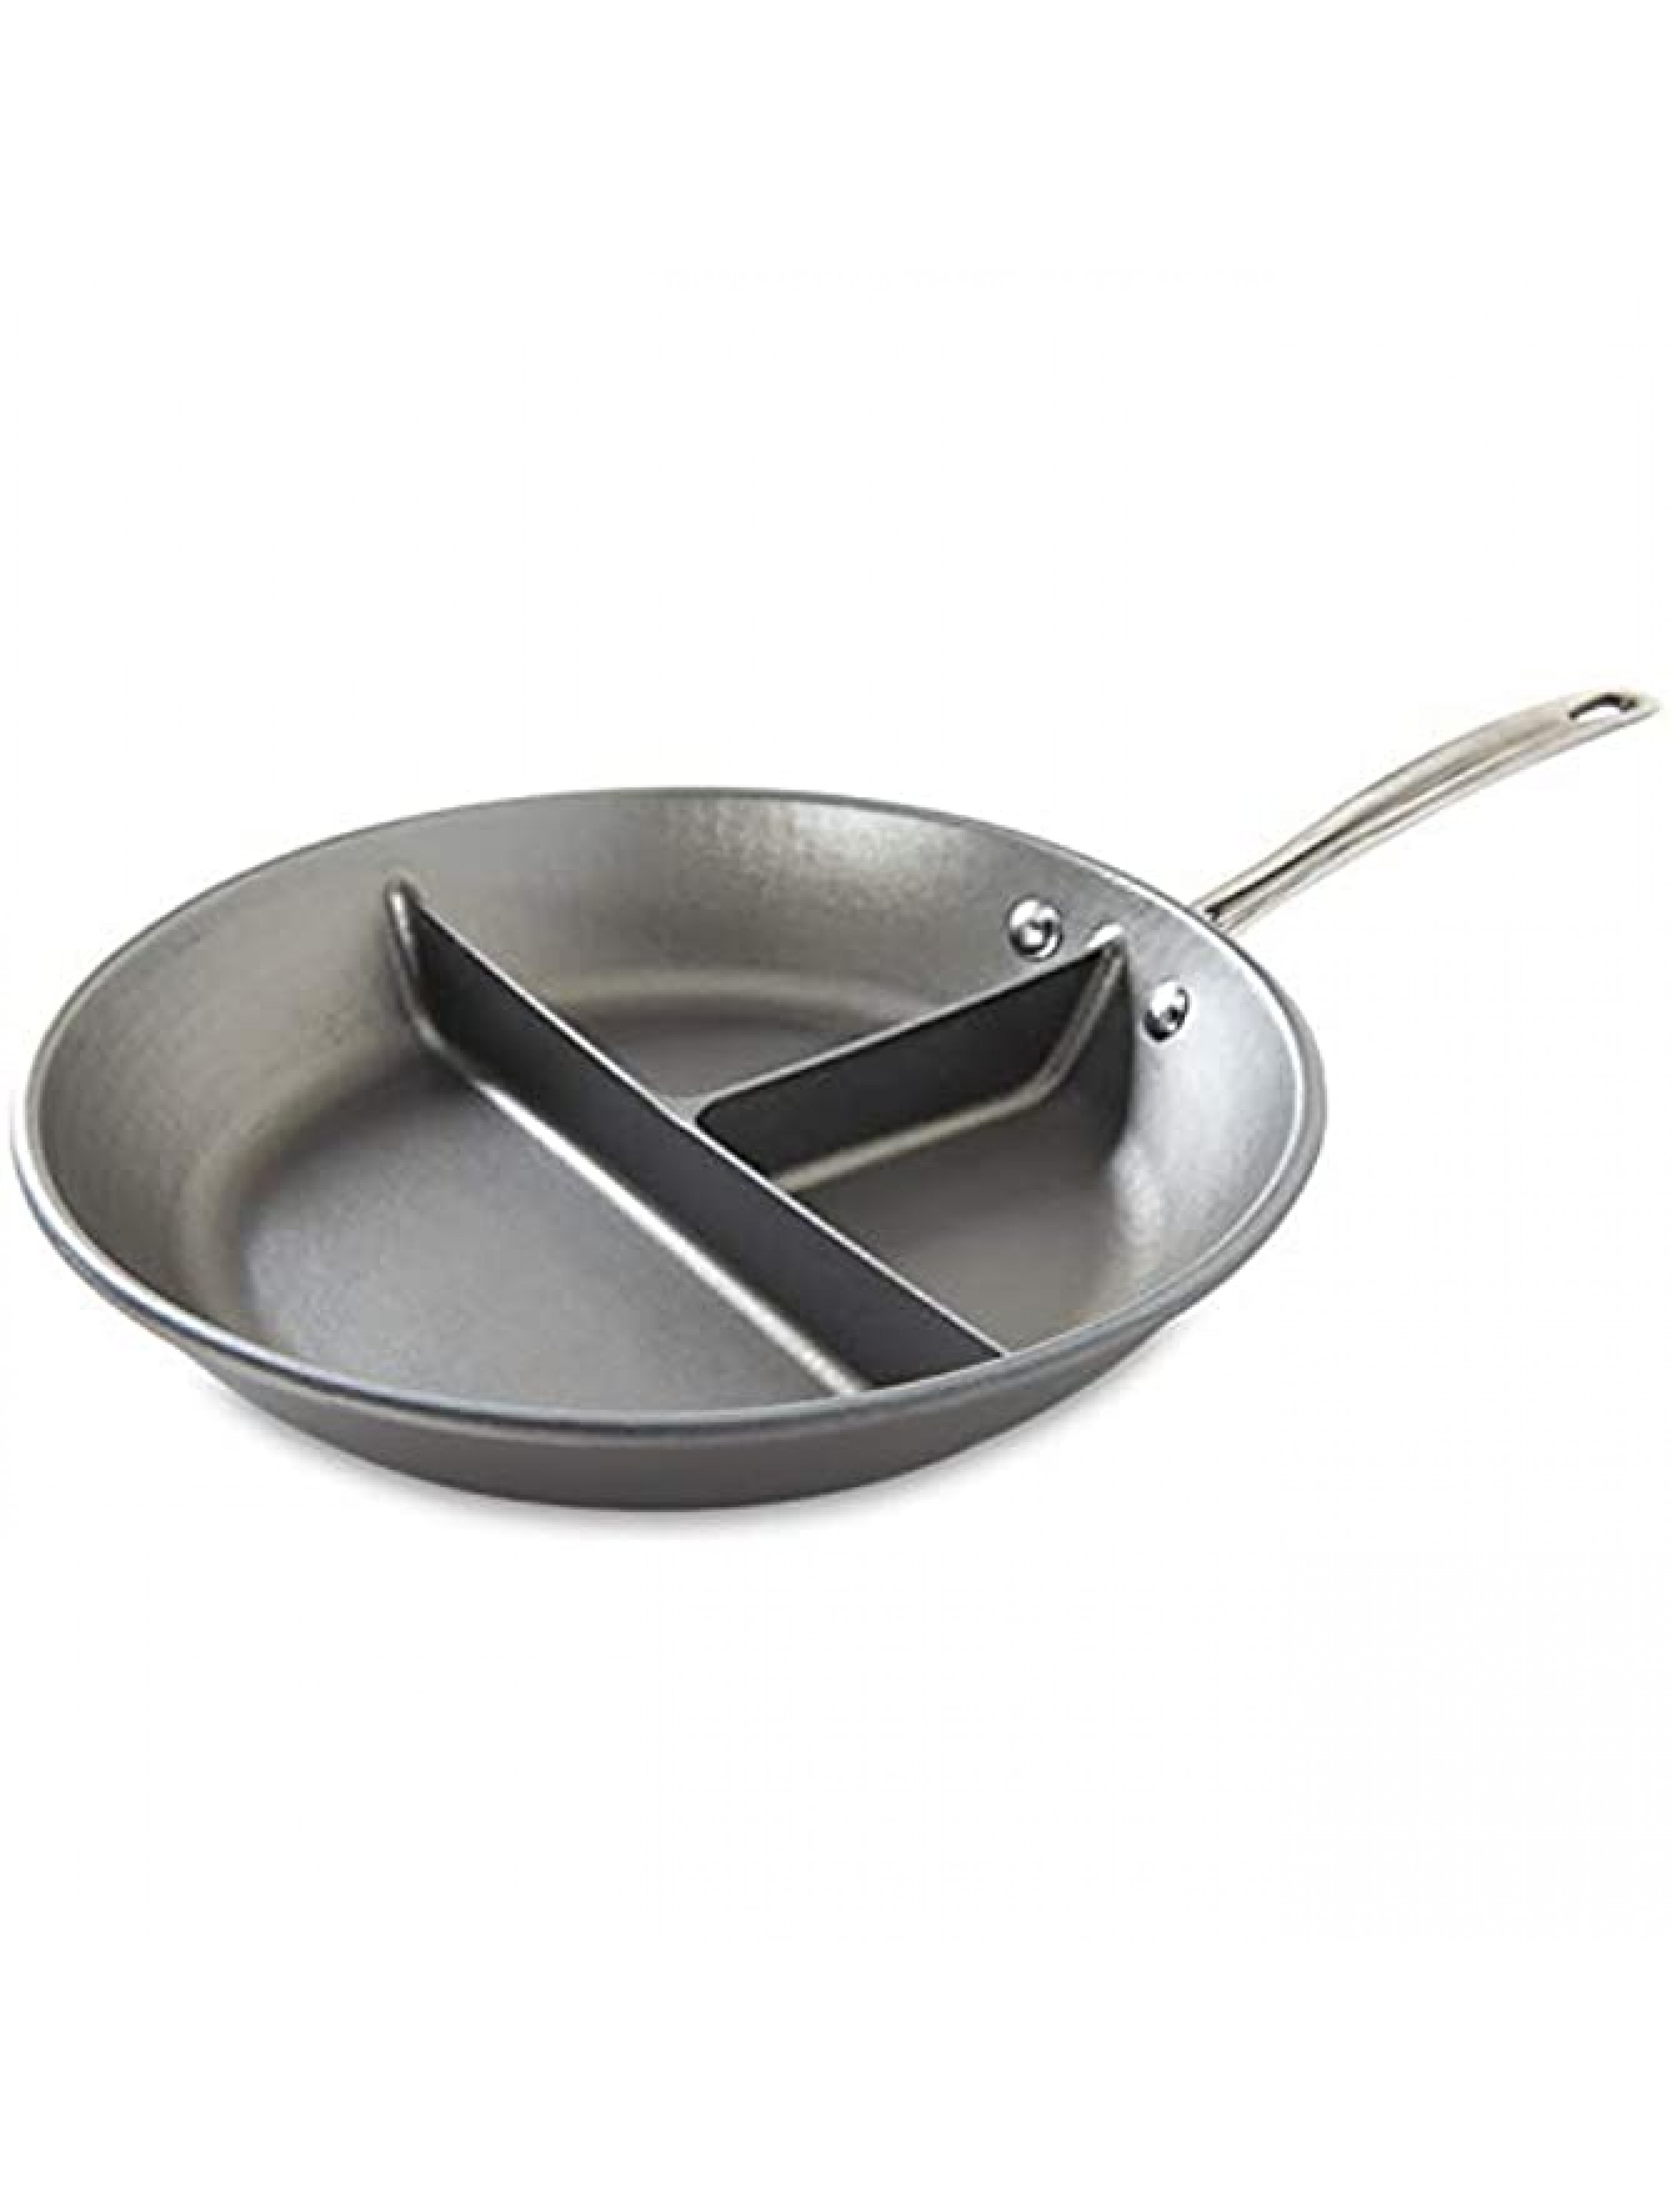 Nordic Ware 14621 Nordic Ware Divided Sauce Pan 3-in-1 Silver - BMVN9QV5I